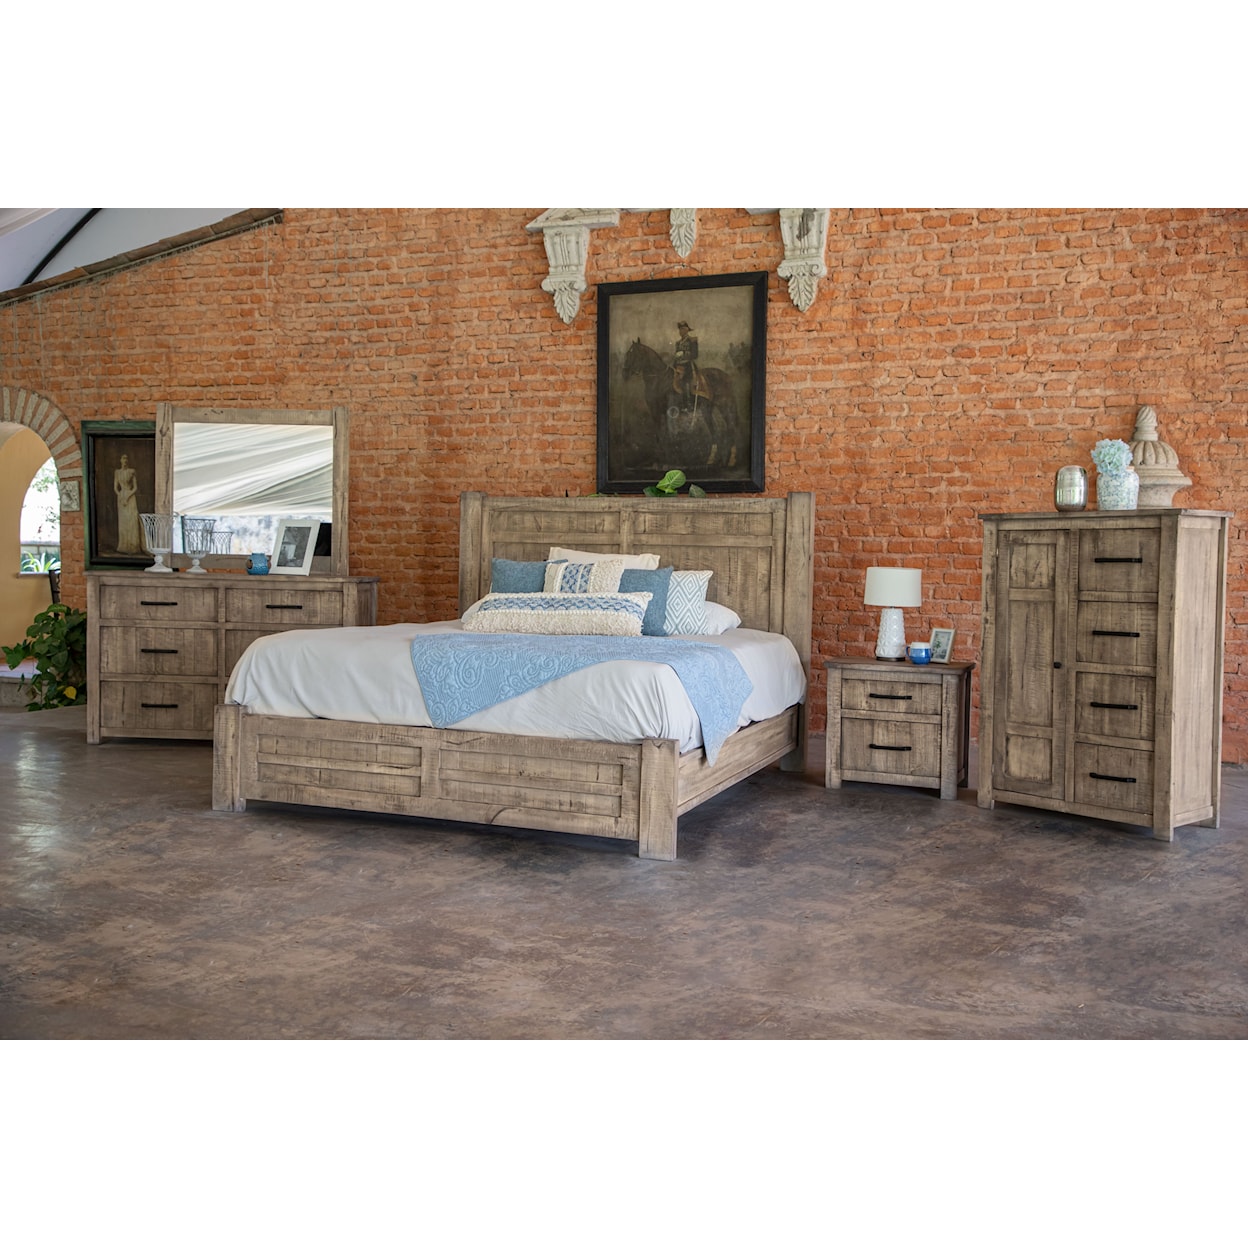 International Furniture Direct Cozumel Queen Size Bed